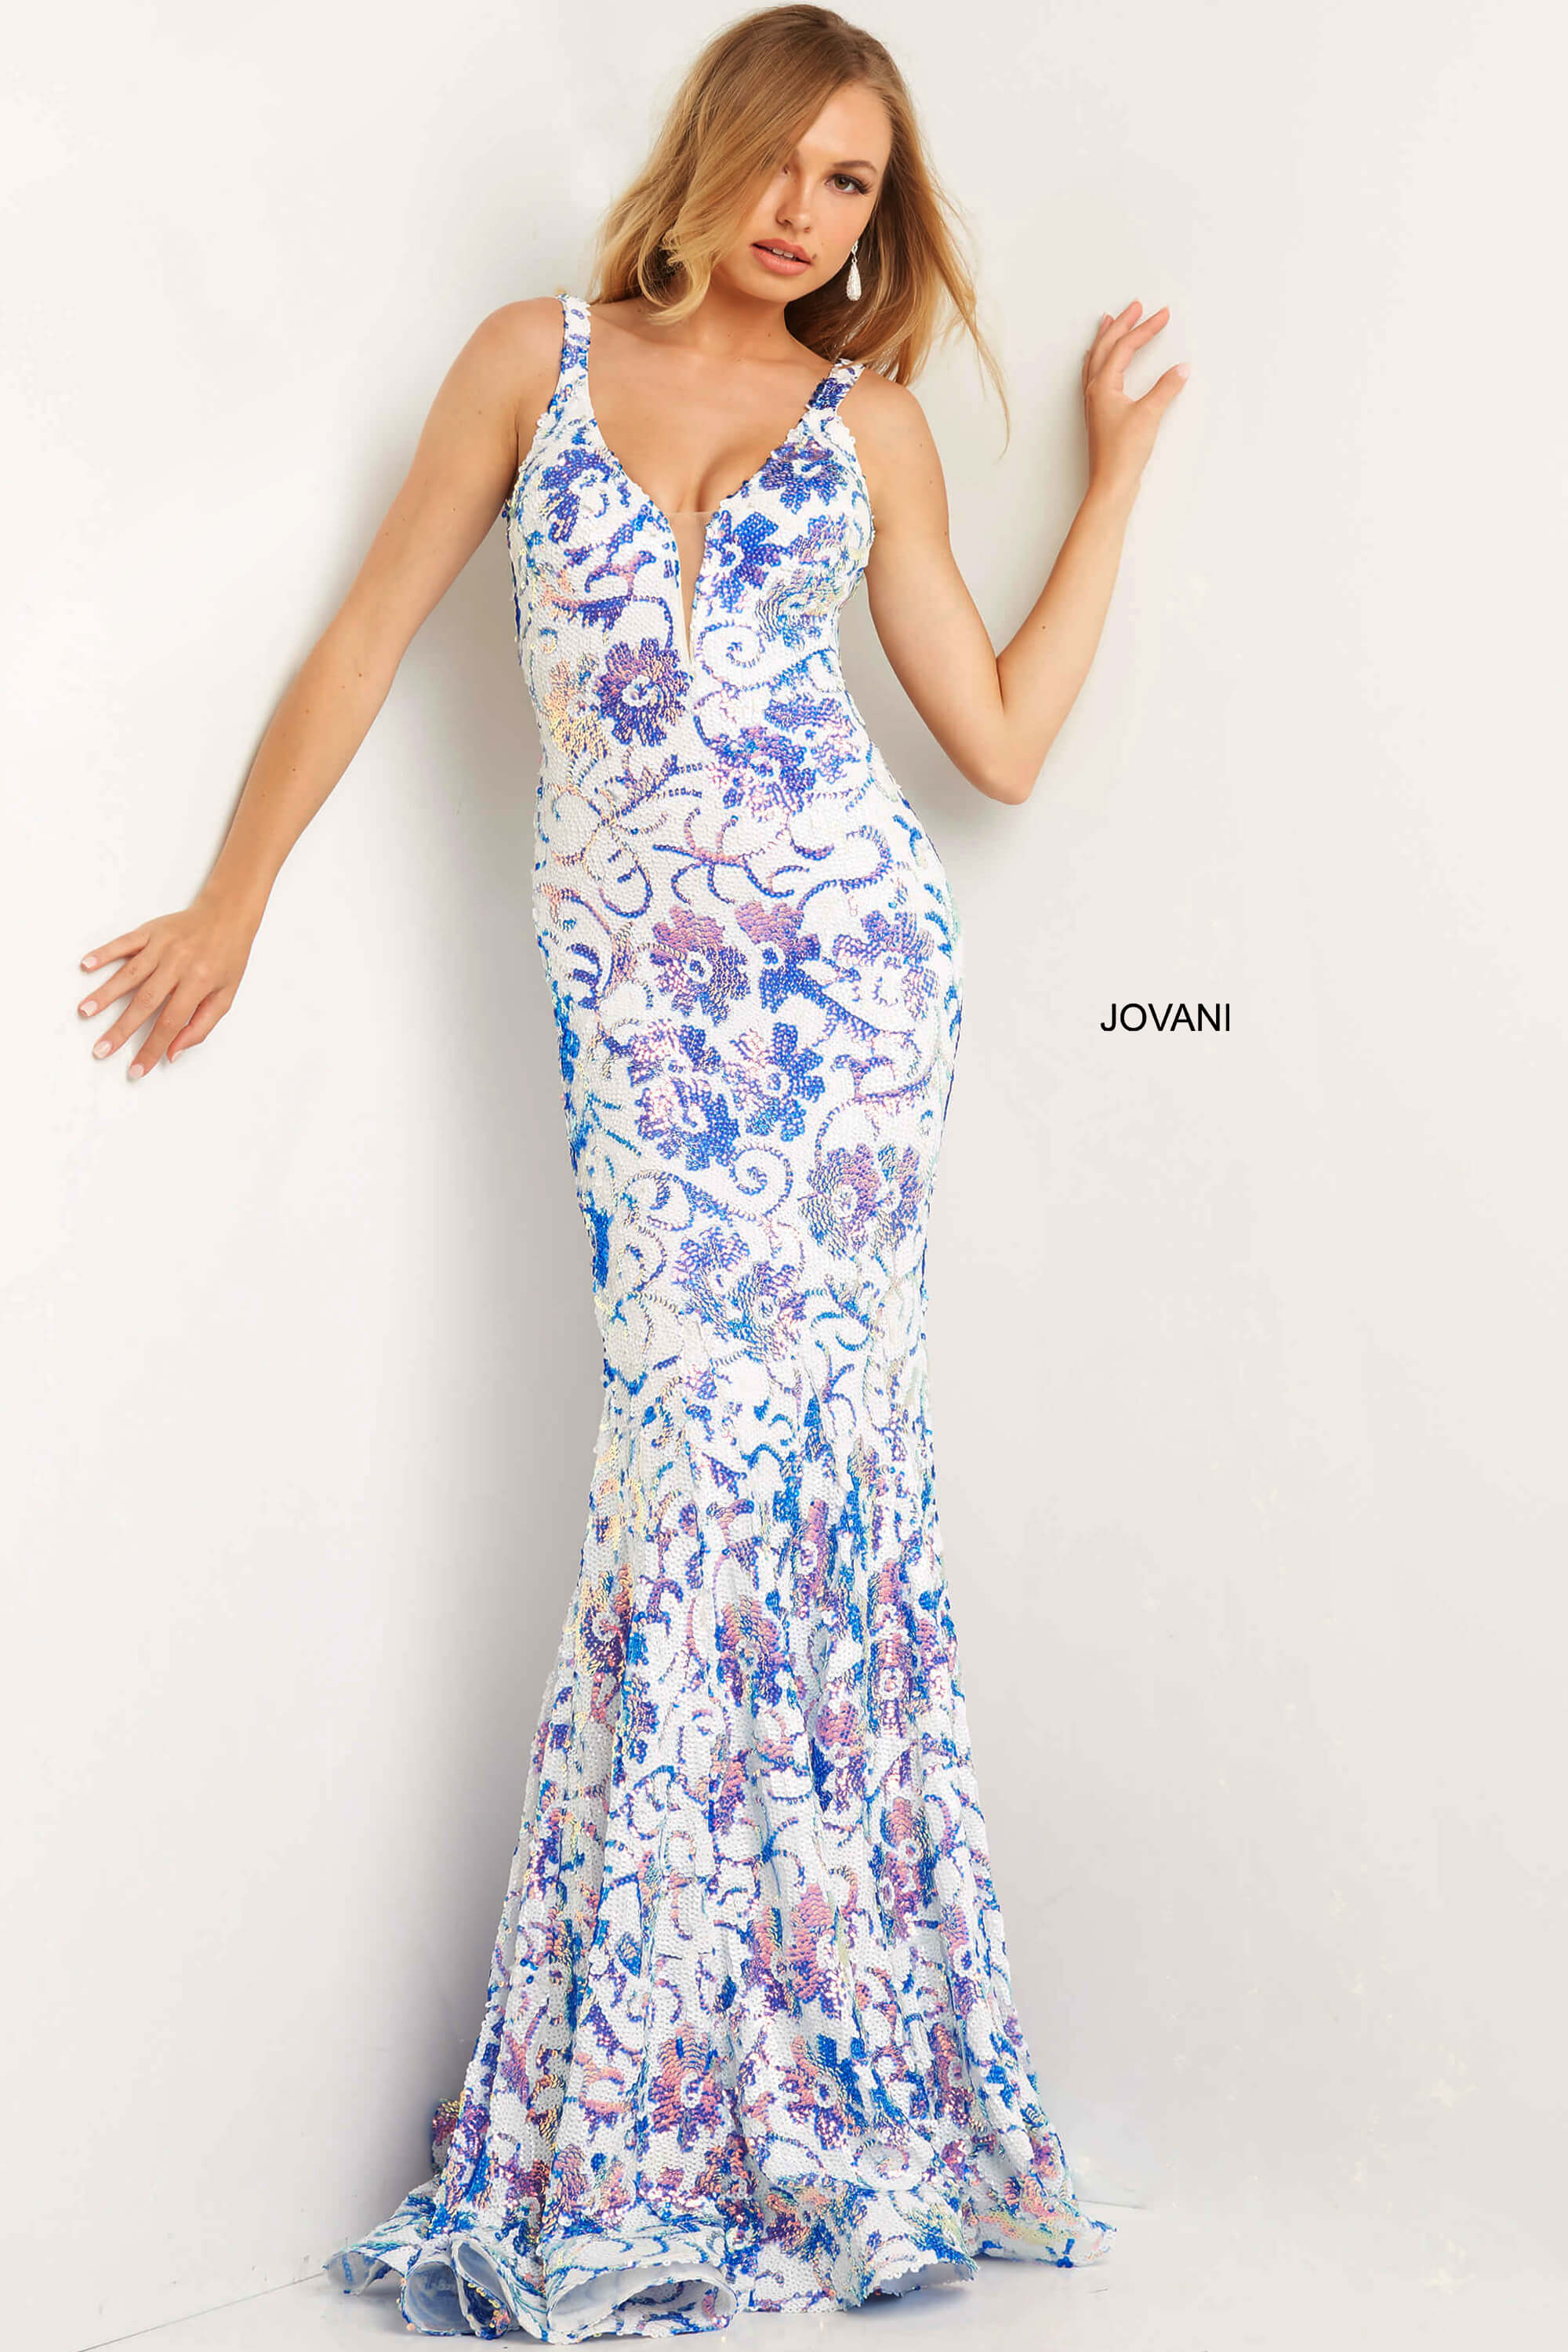 Sequin Fitted Prom Dress By Jovani -08257